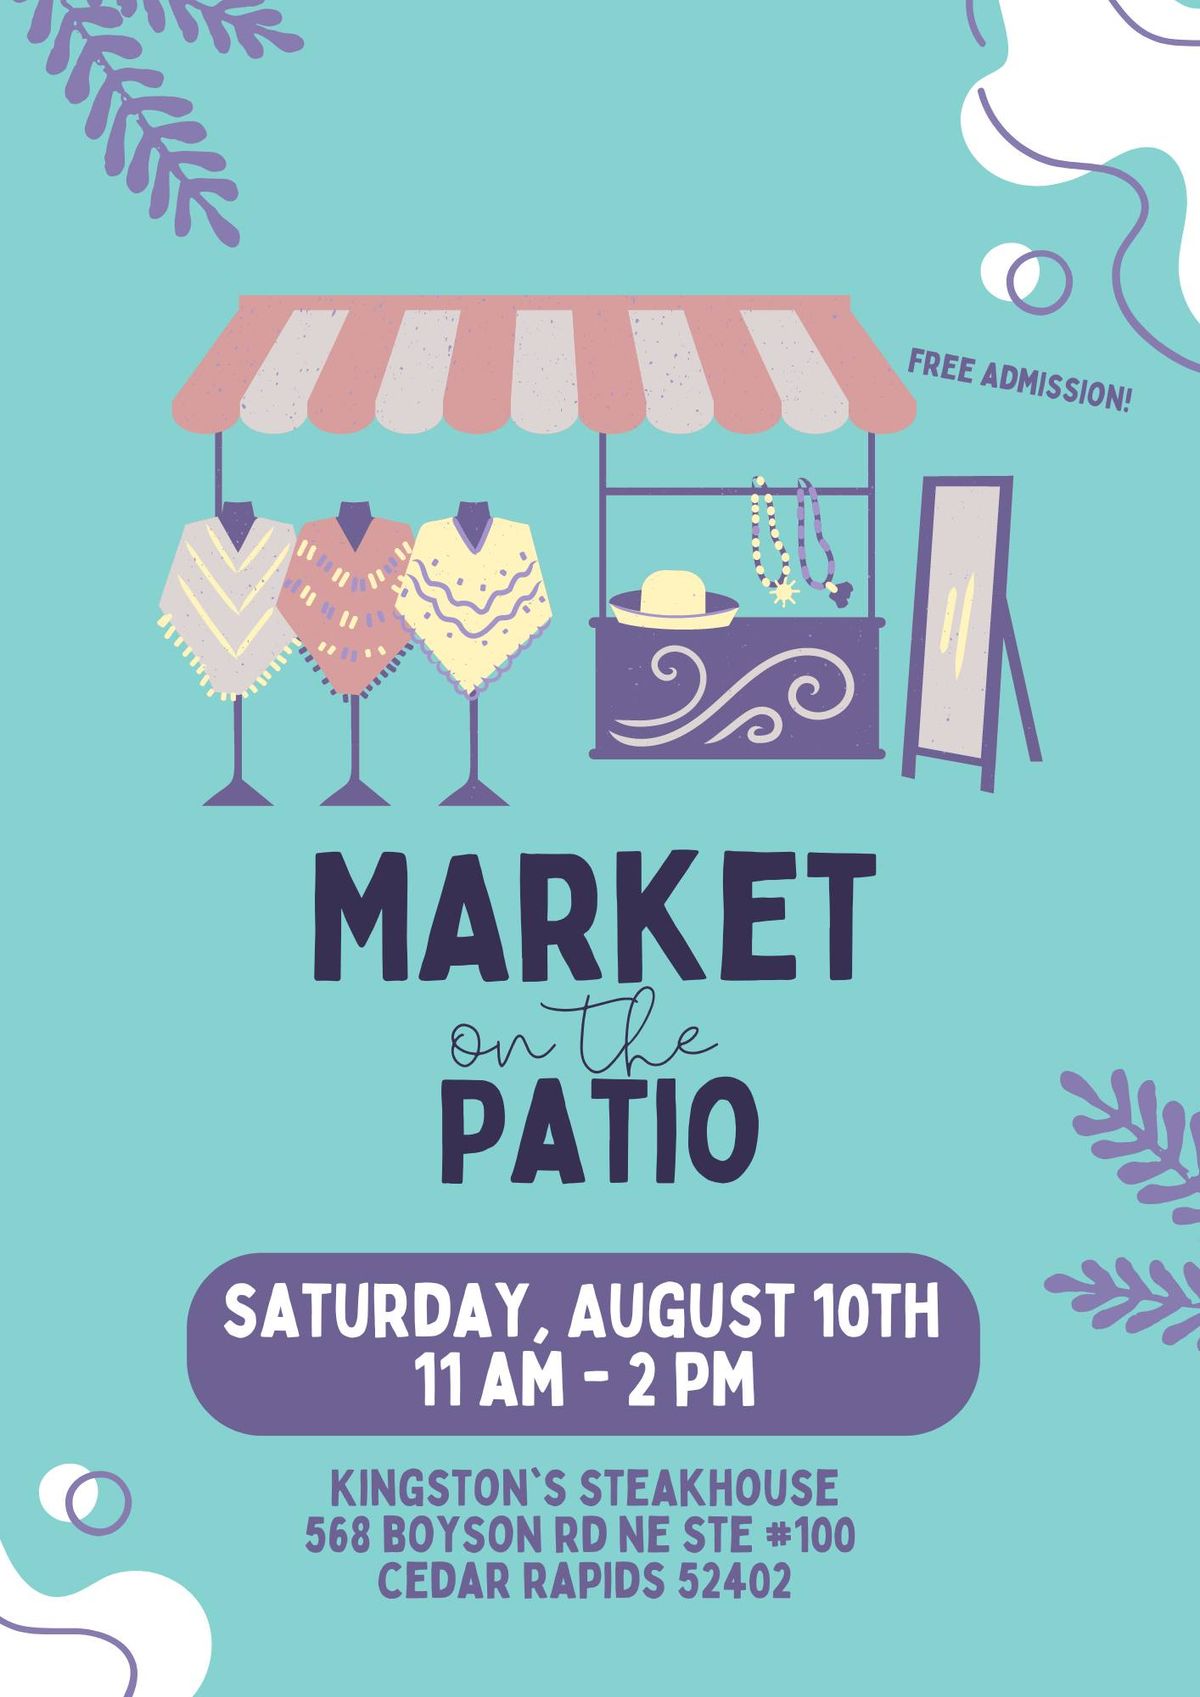 Market on the Patio!